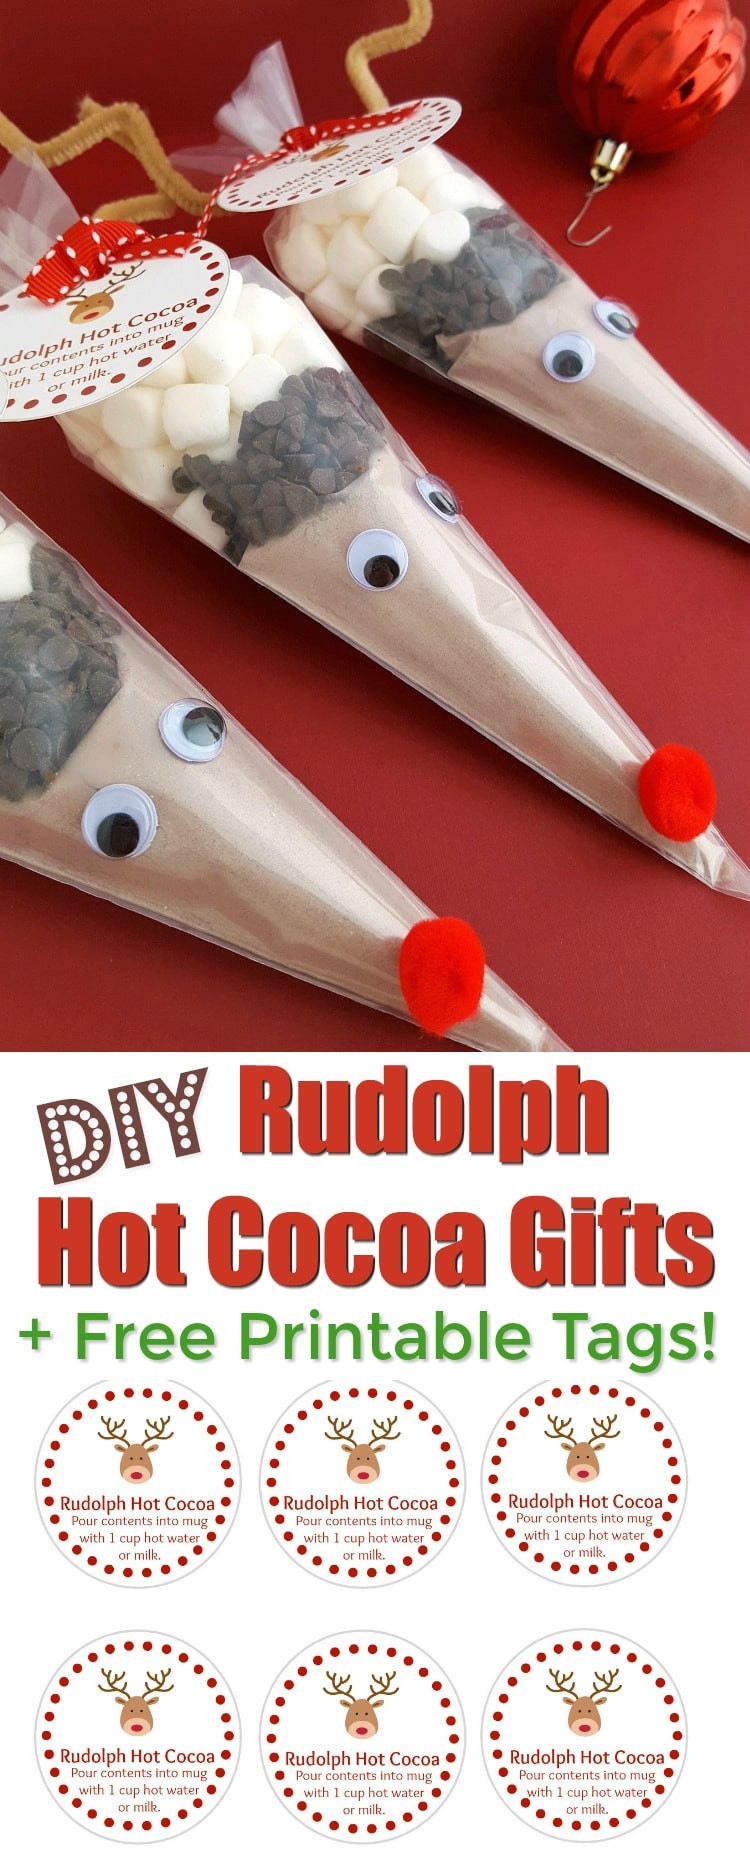 DIY Hot Chocolate Gifts
 Reindeer Hot Chocolate Bags with Free Printable Tags